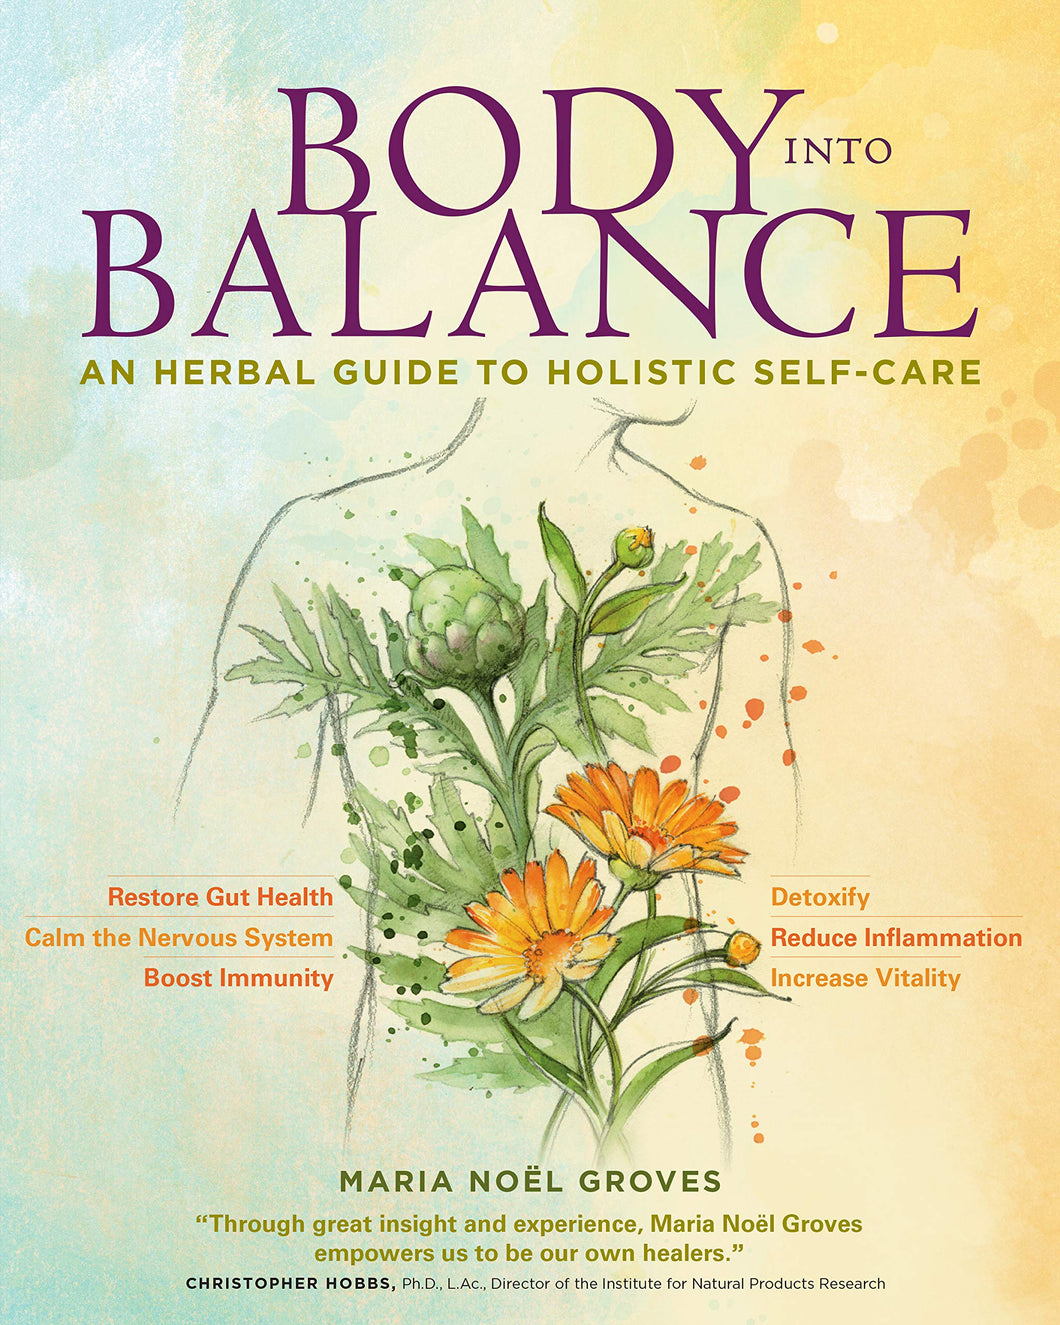 Body into Balance: An Herbal Guide to Holistic Self-Care by Maria Noel Groves